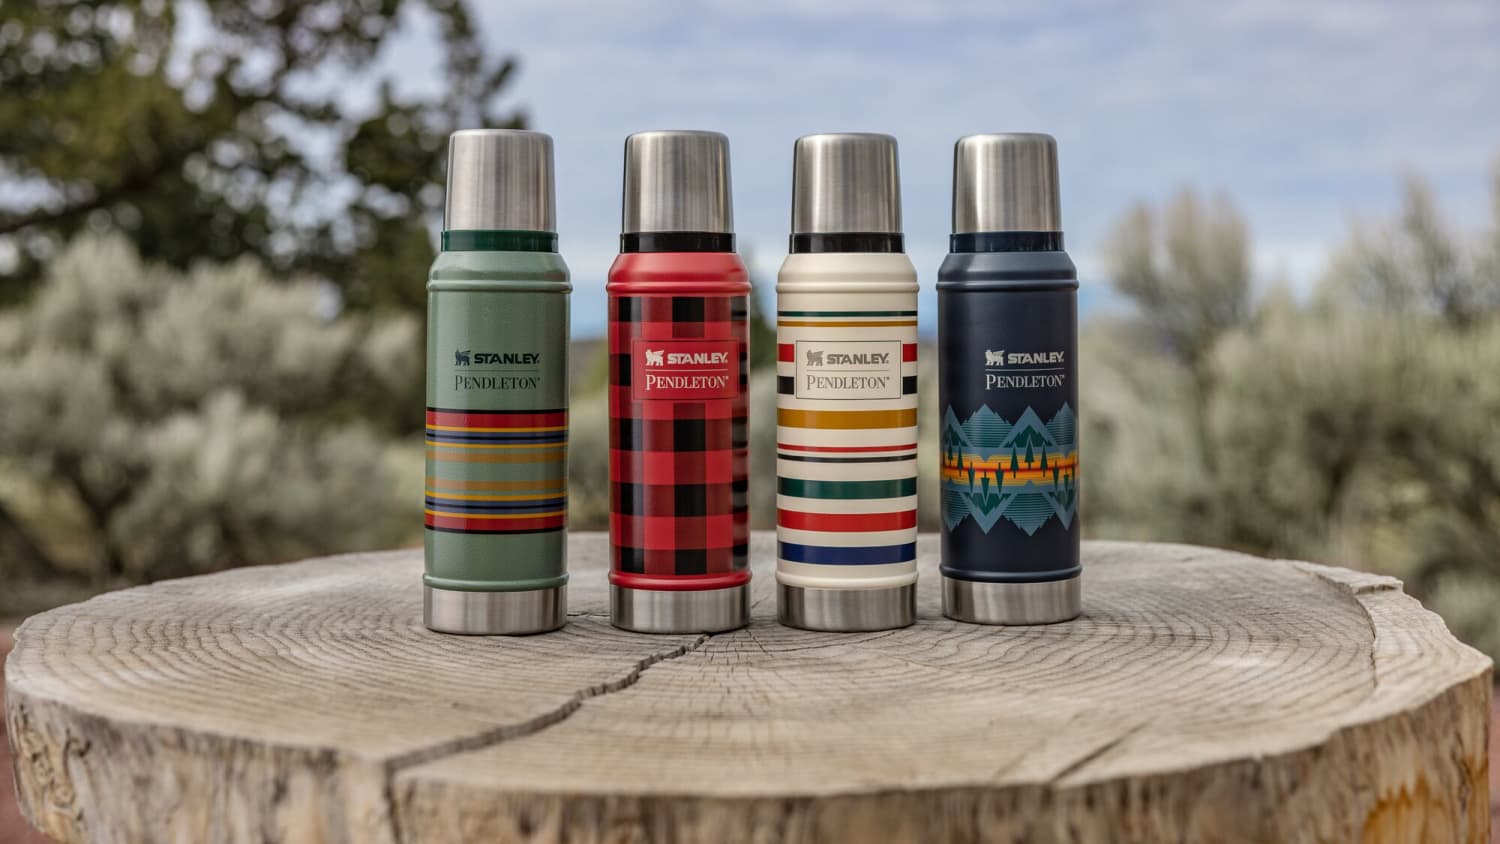 THE ICONIC STANLEY THERMOS GETS A MODERN UPDATE